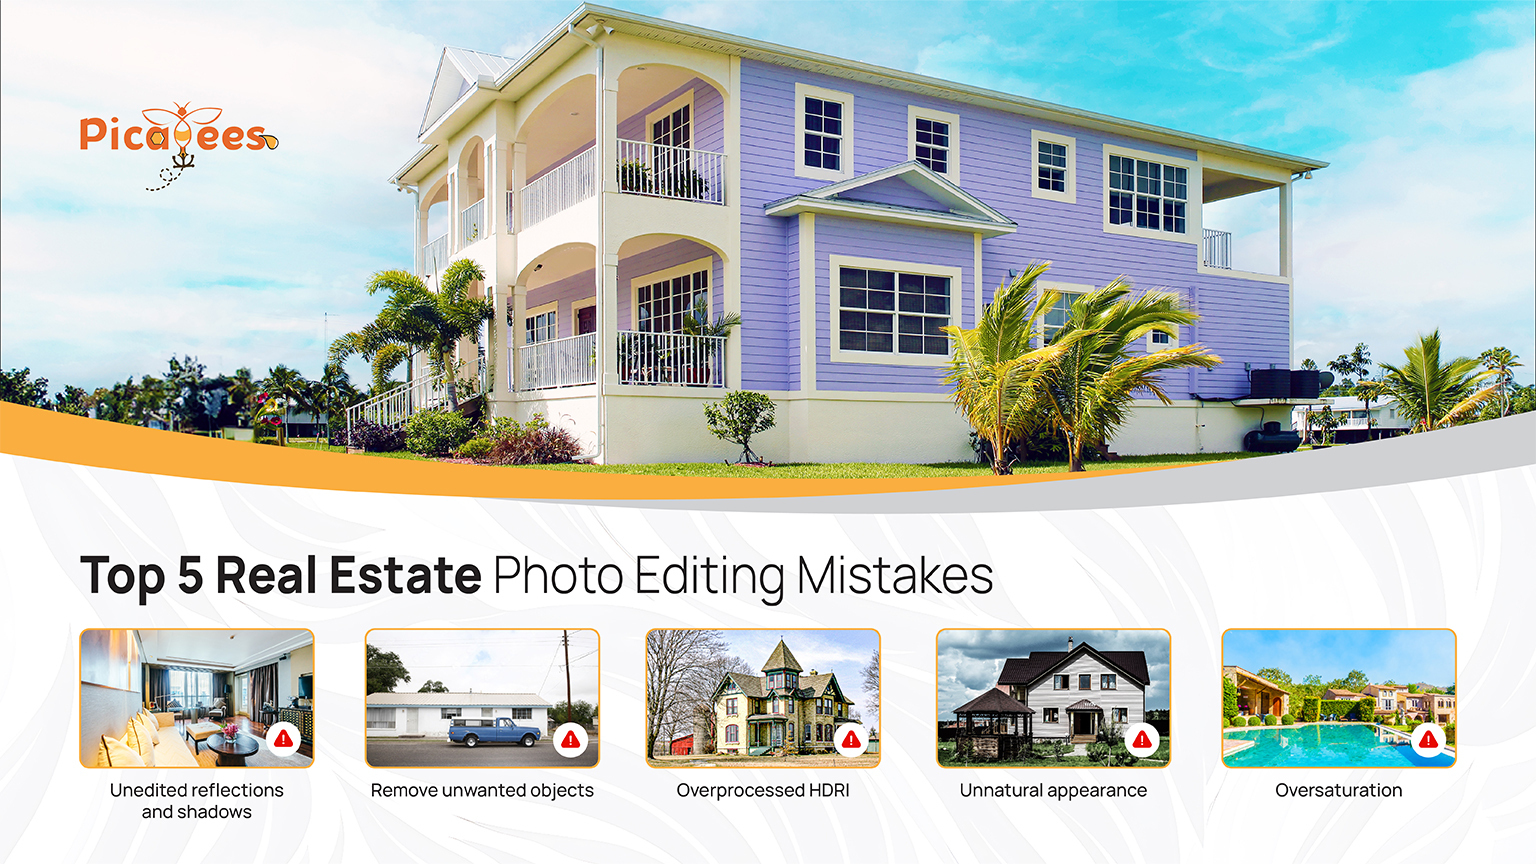 Avoid These 5 Biggest Real Estate Photo Editing Mistakes to Elevate Your Property Listings